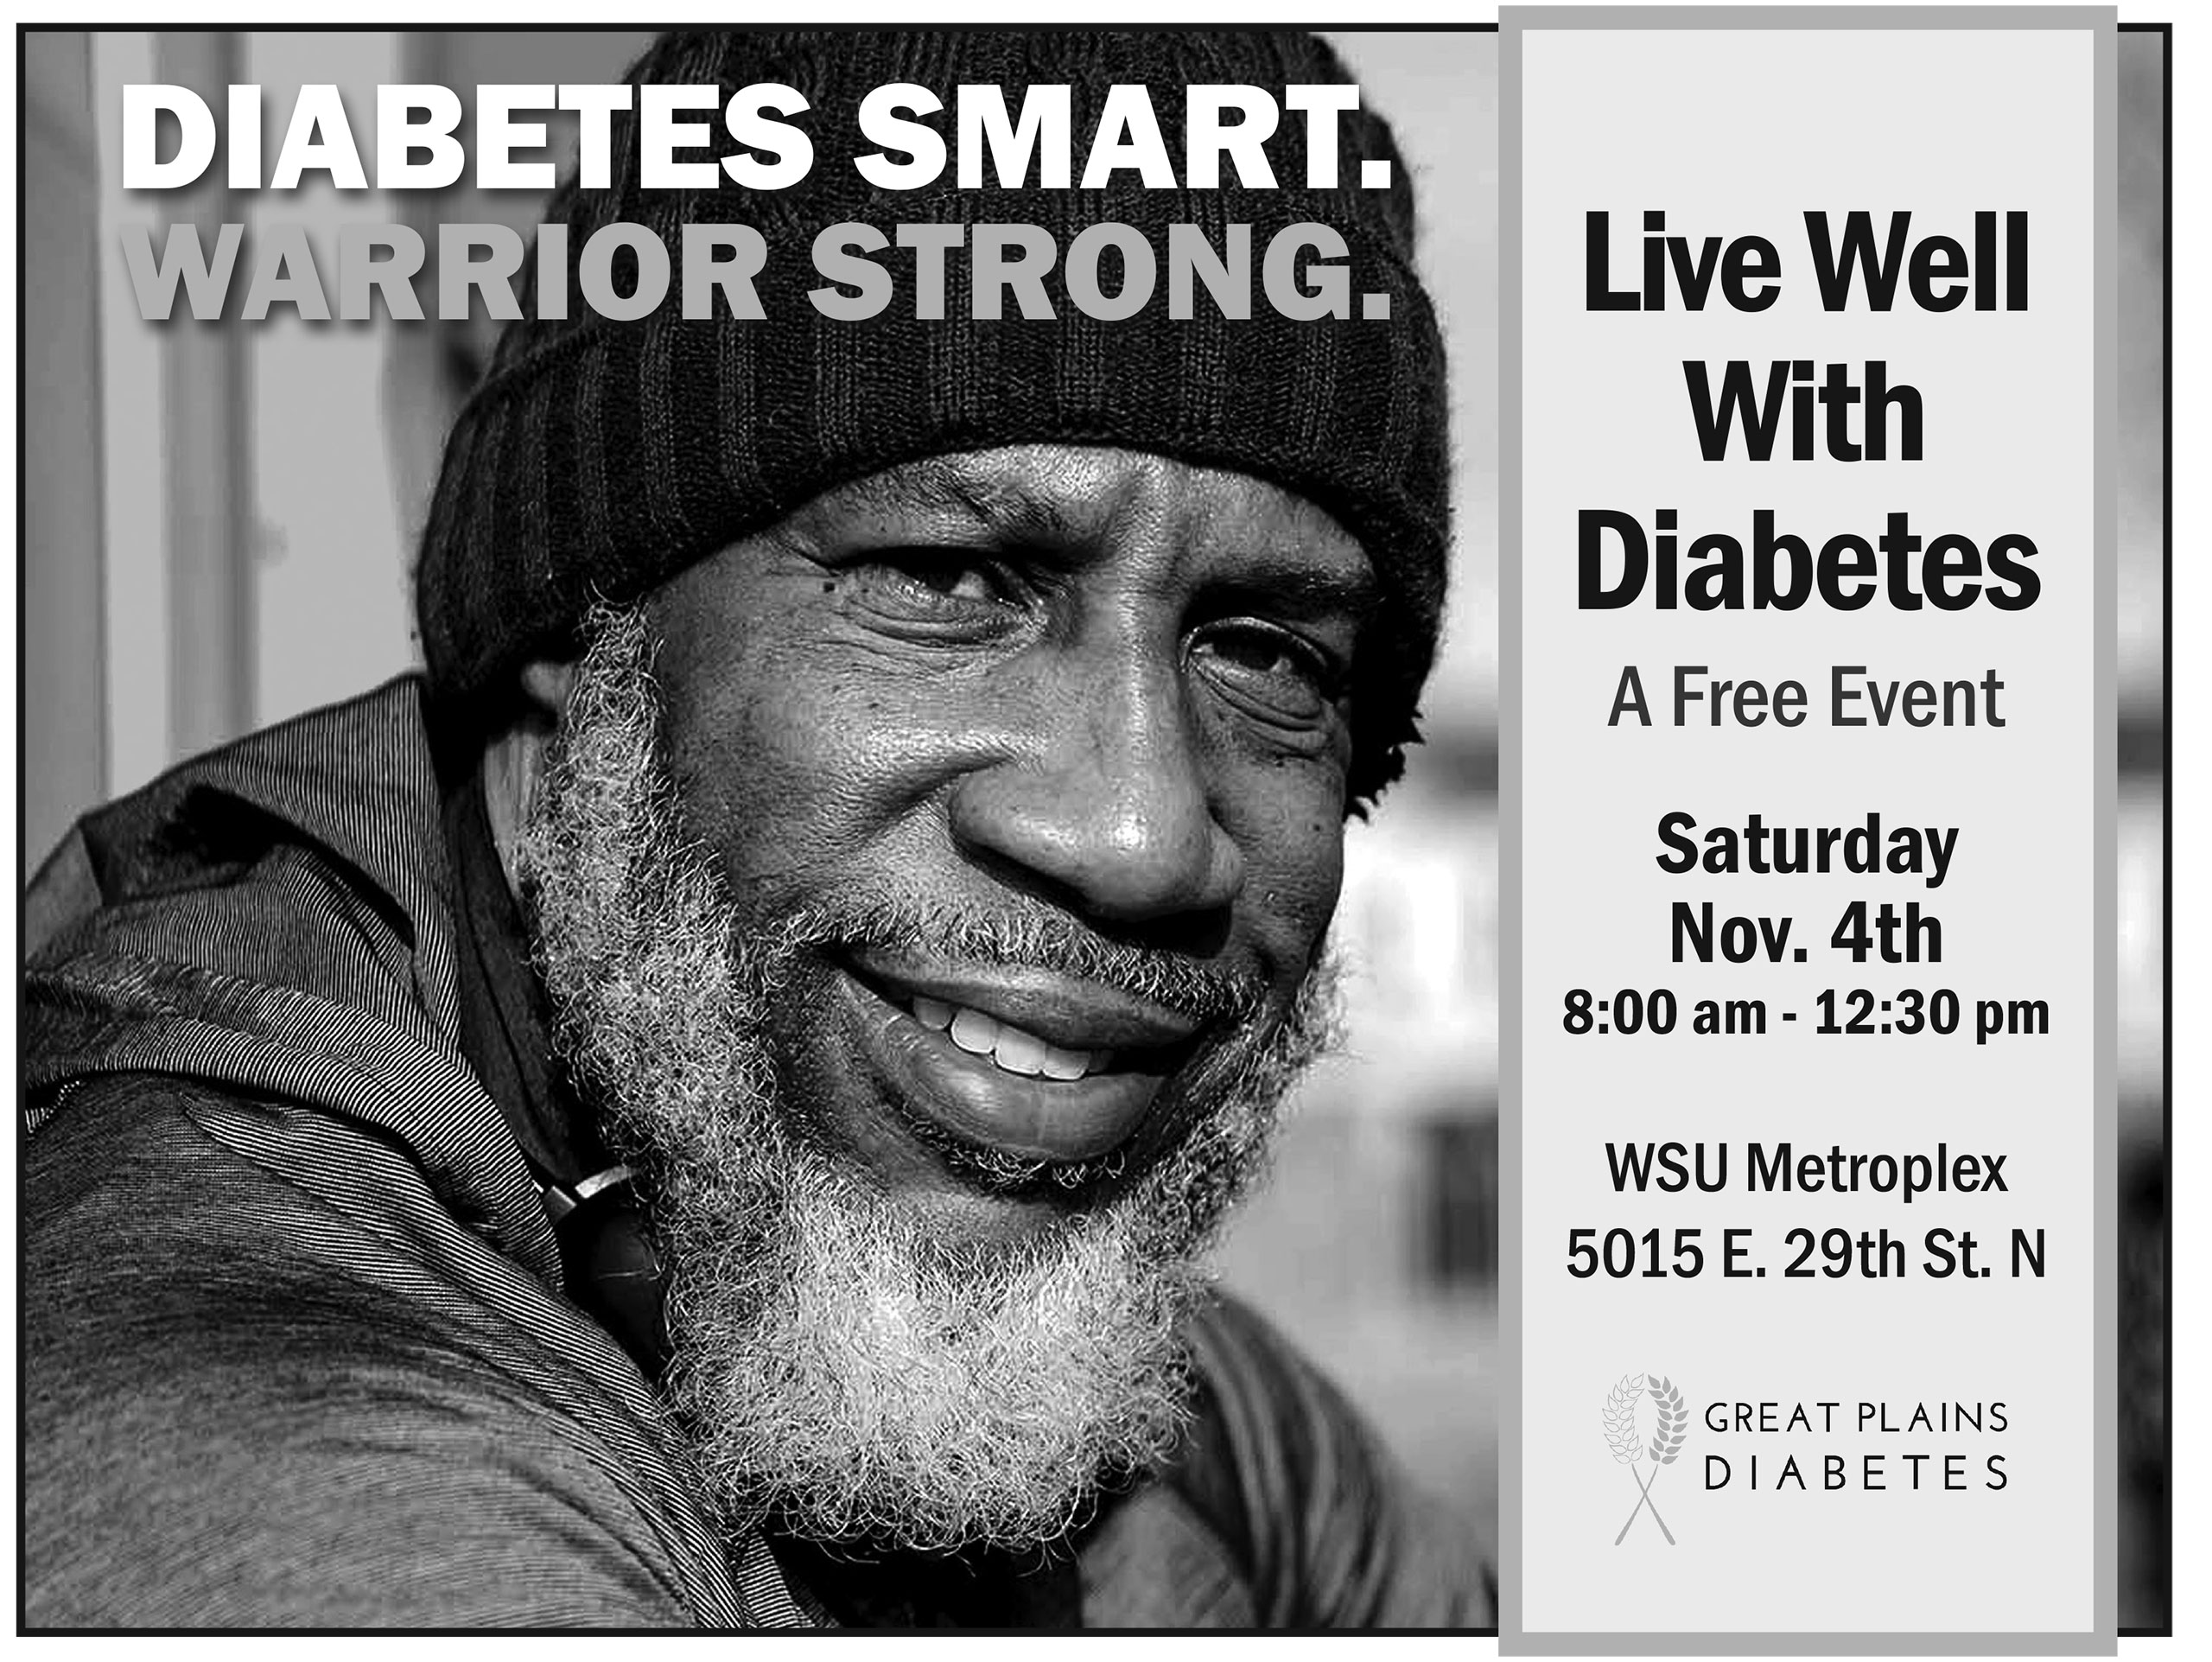 Image of Live Well with Diabetes event poster